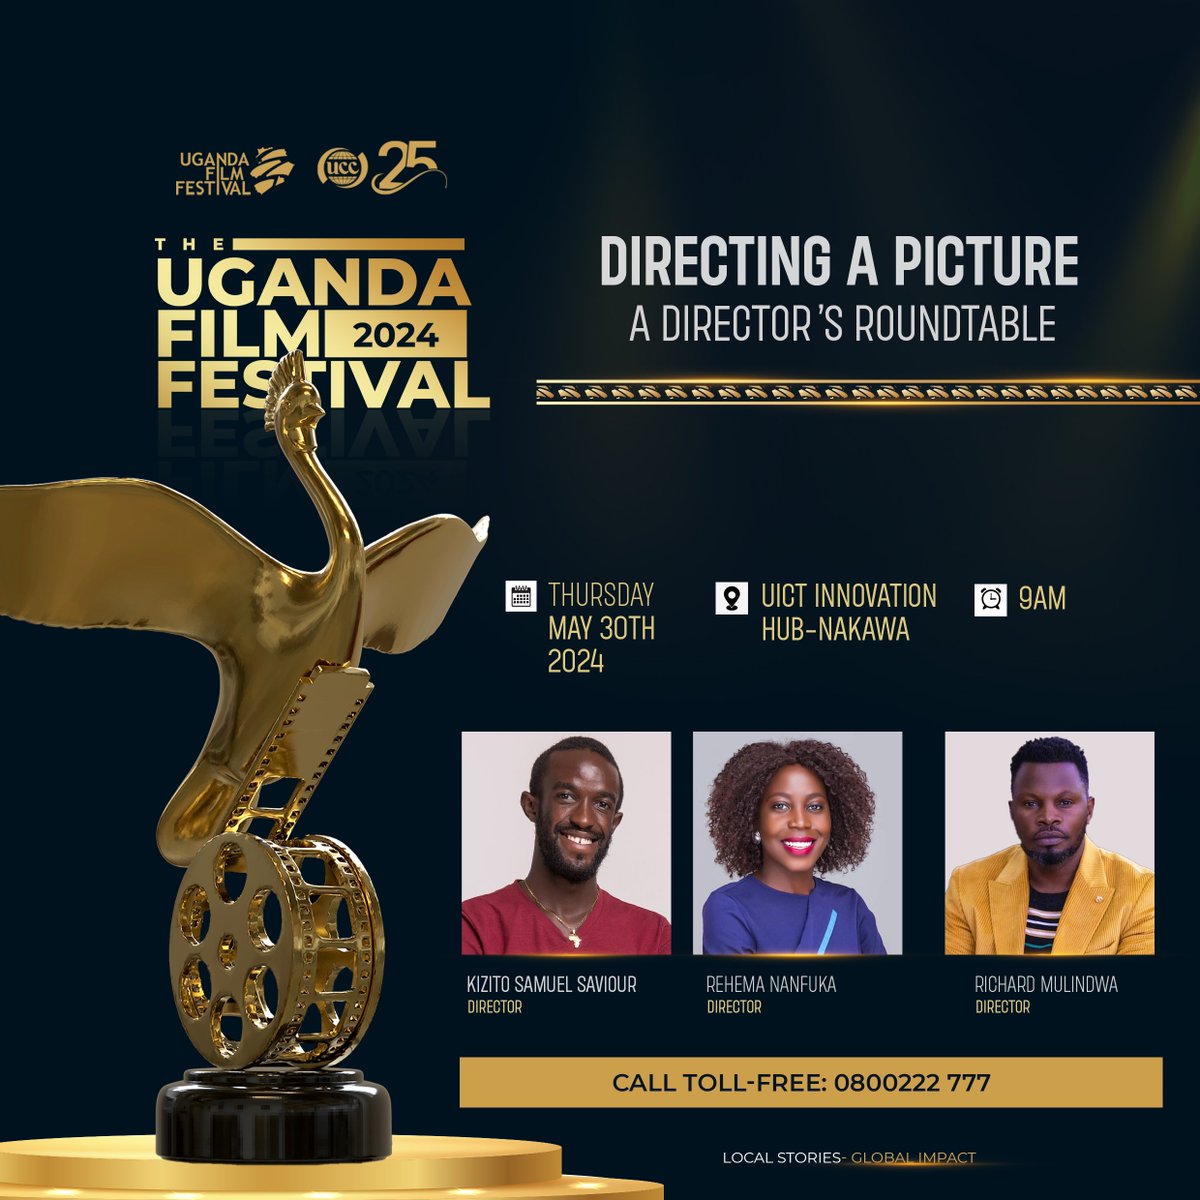 Gain valuable knowledge from established directors sharing experiences, techniques, and lessons learned in the industry, today at @UICTug Nakawa in a @UgandaFilm workshop 'A director's roundtable' focusing on Directing a Picture.

Time: 9am

#LocalstoriesGlobalimpact #UFF2024